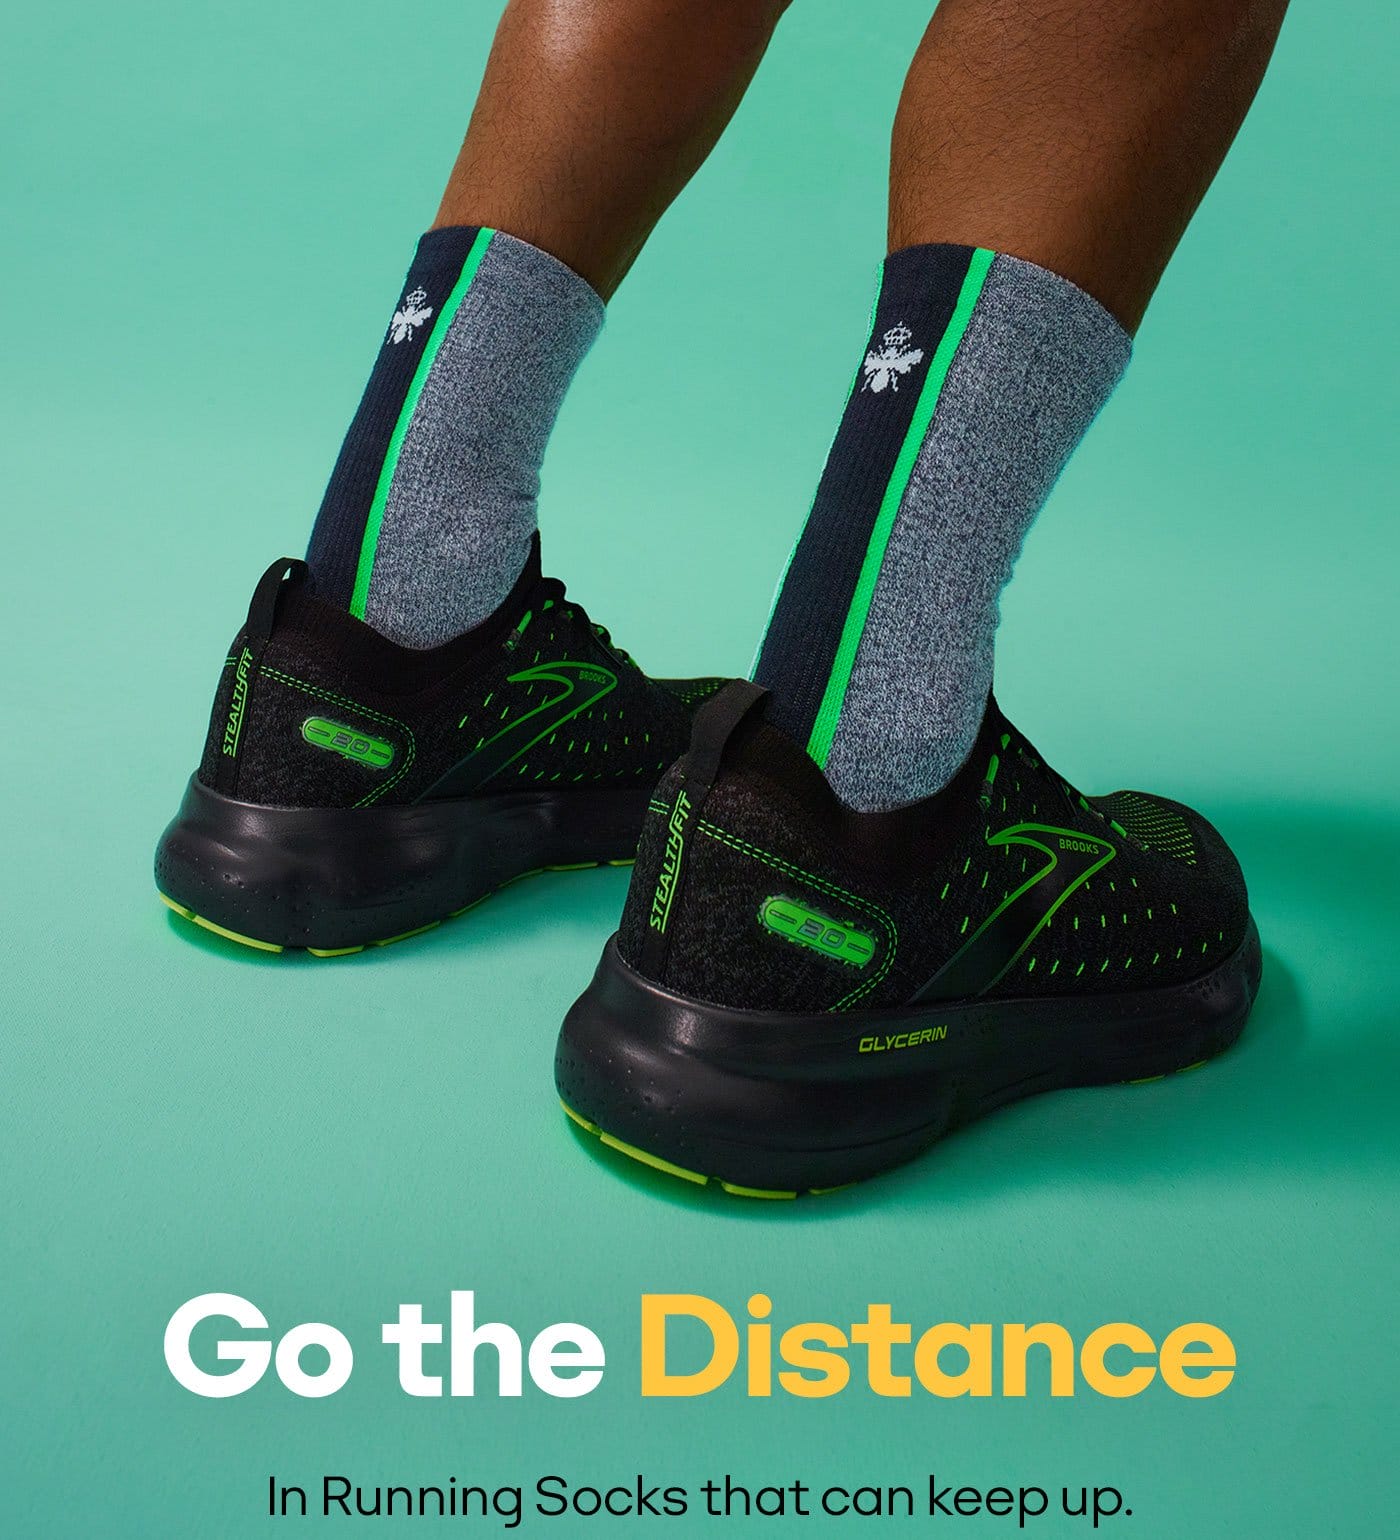 Go the Distance in Running Socks that can keep up.